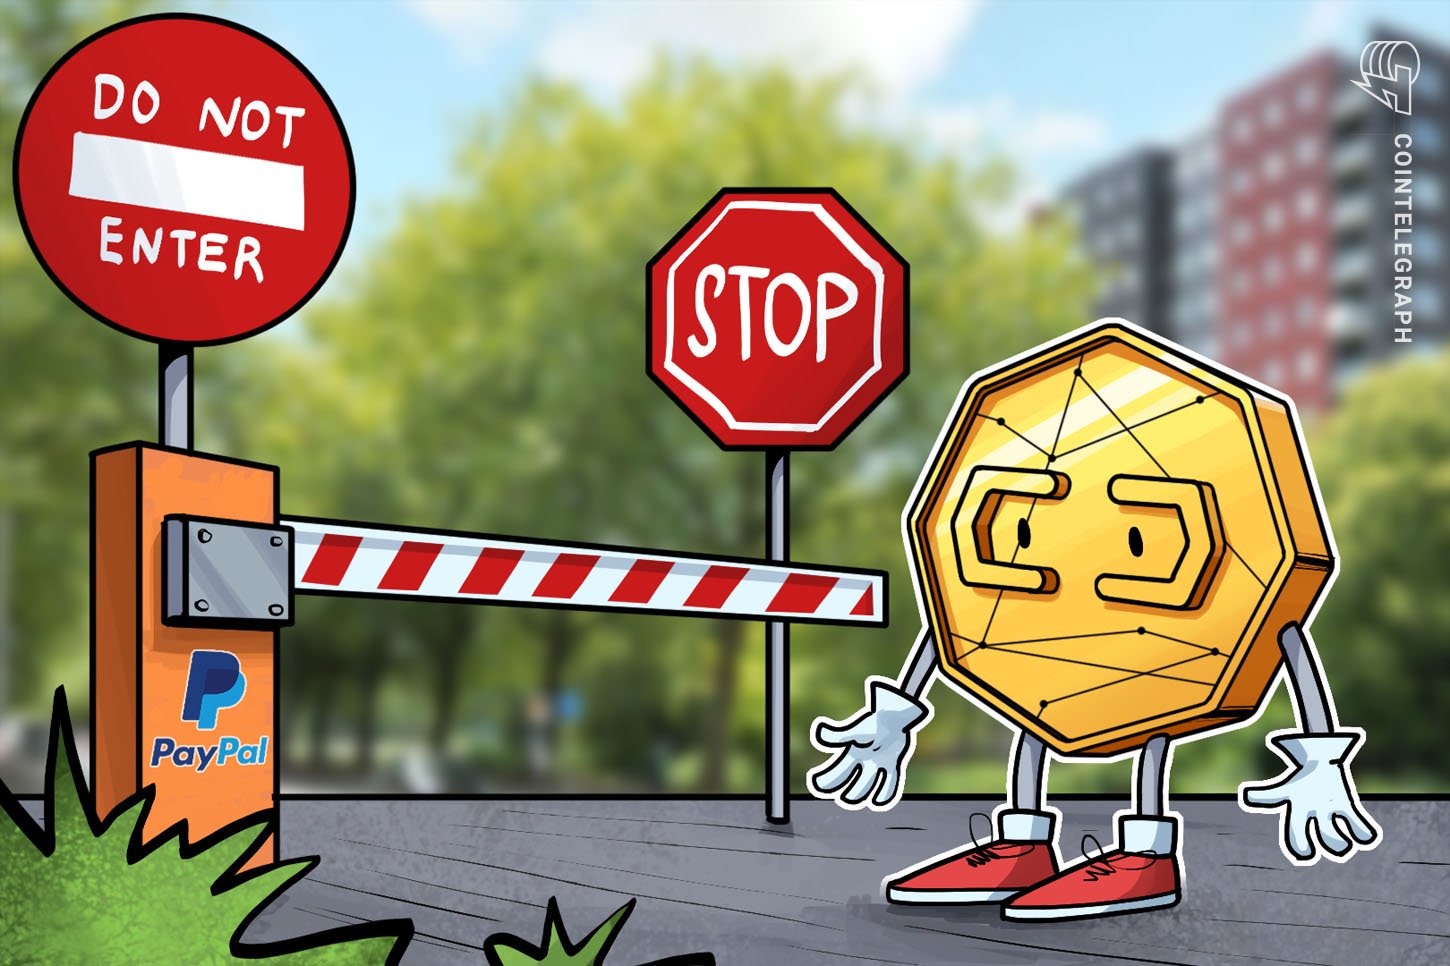 ‘Dangerous’ Tokenized Actual Property Platform Hits New Heights After Paypal Ban